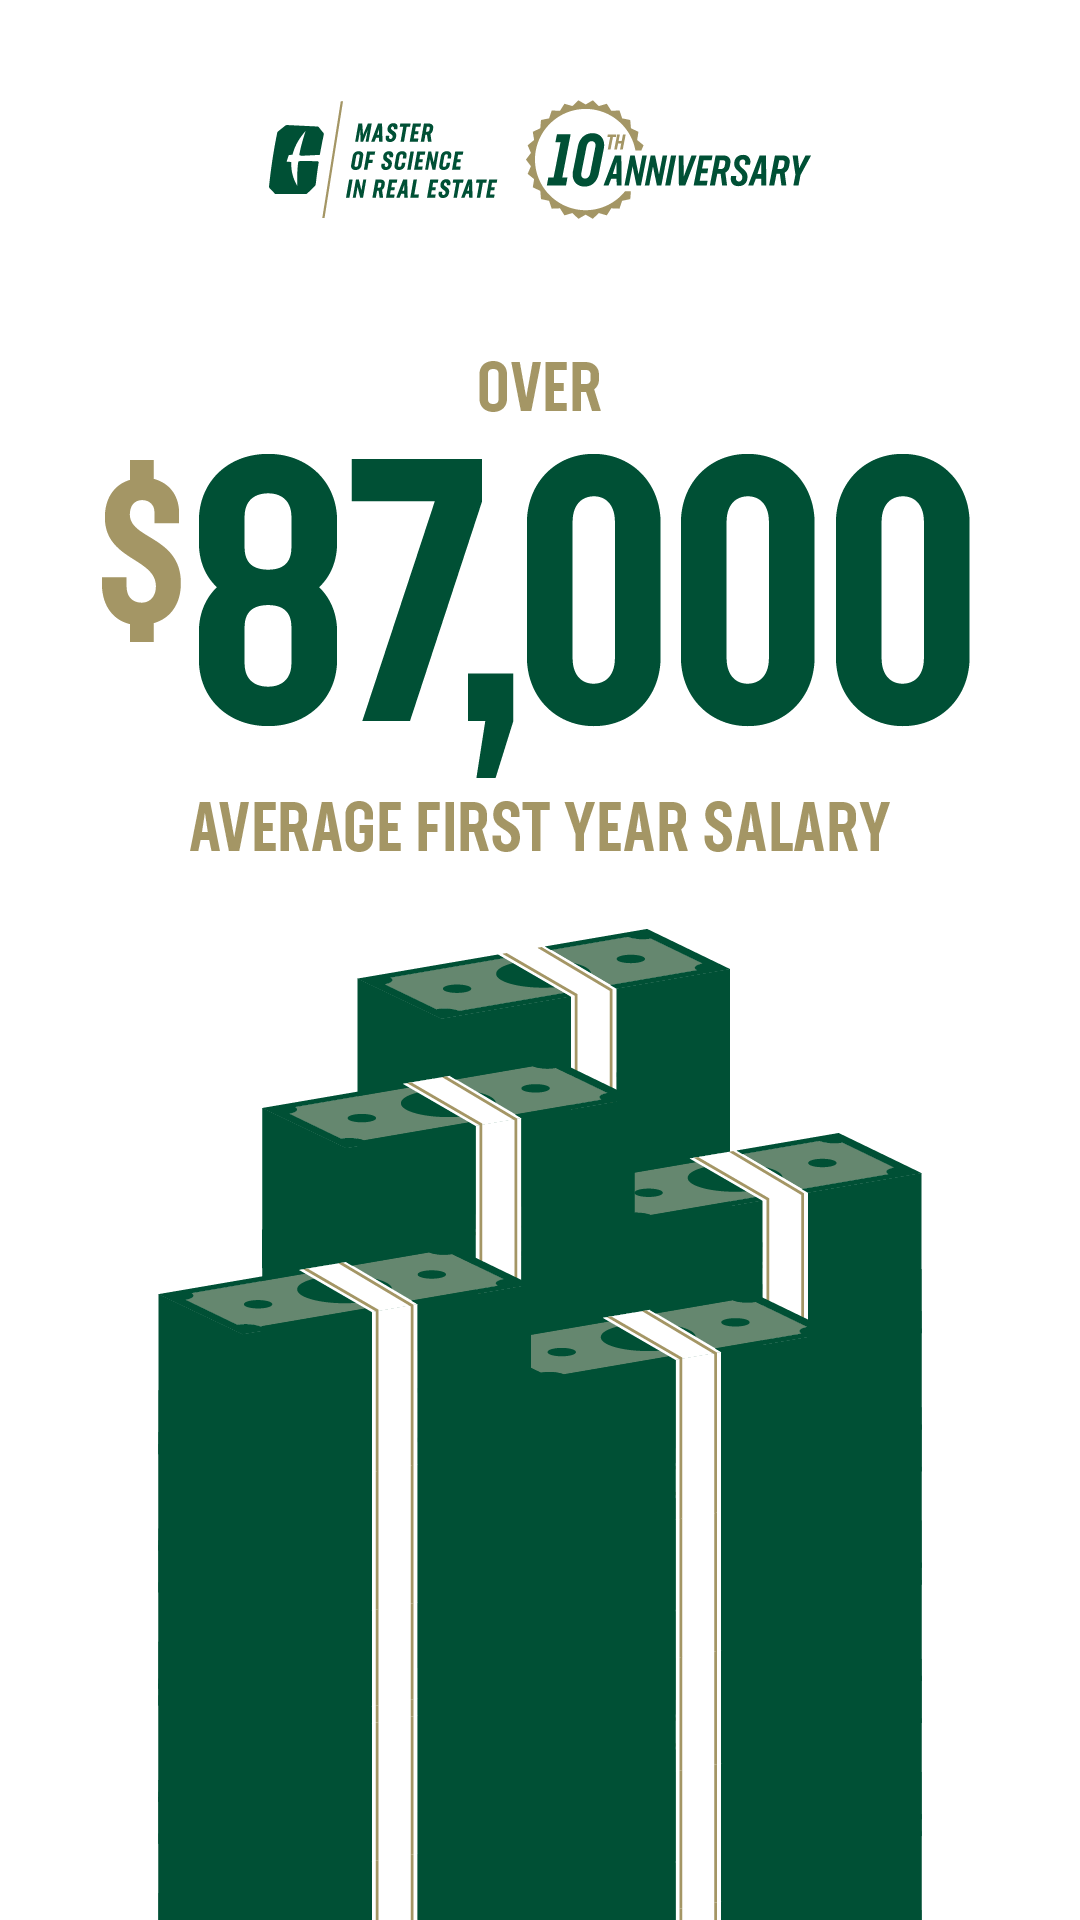 Over $87,000 average first year salary 